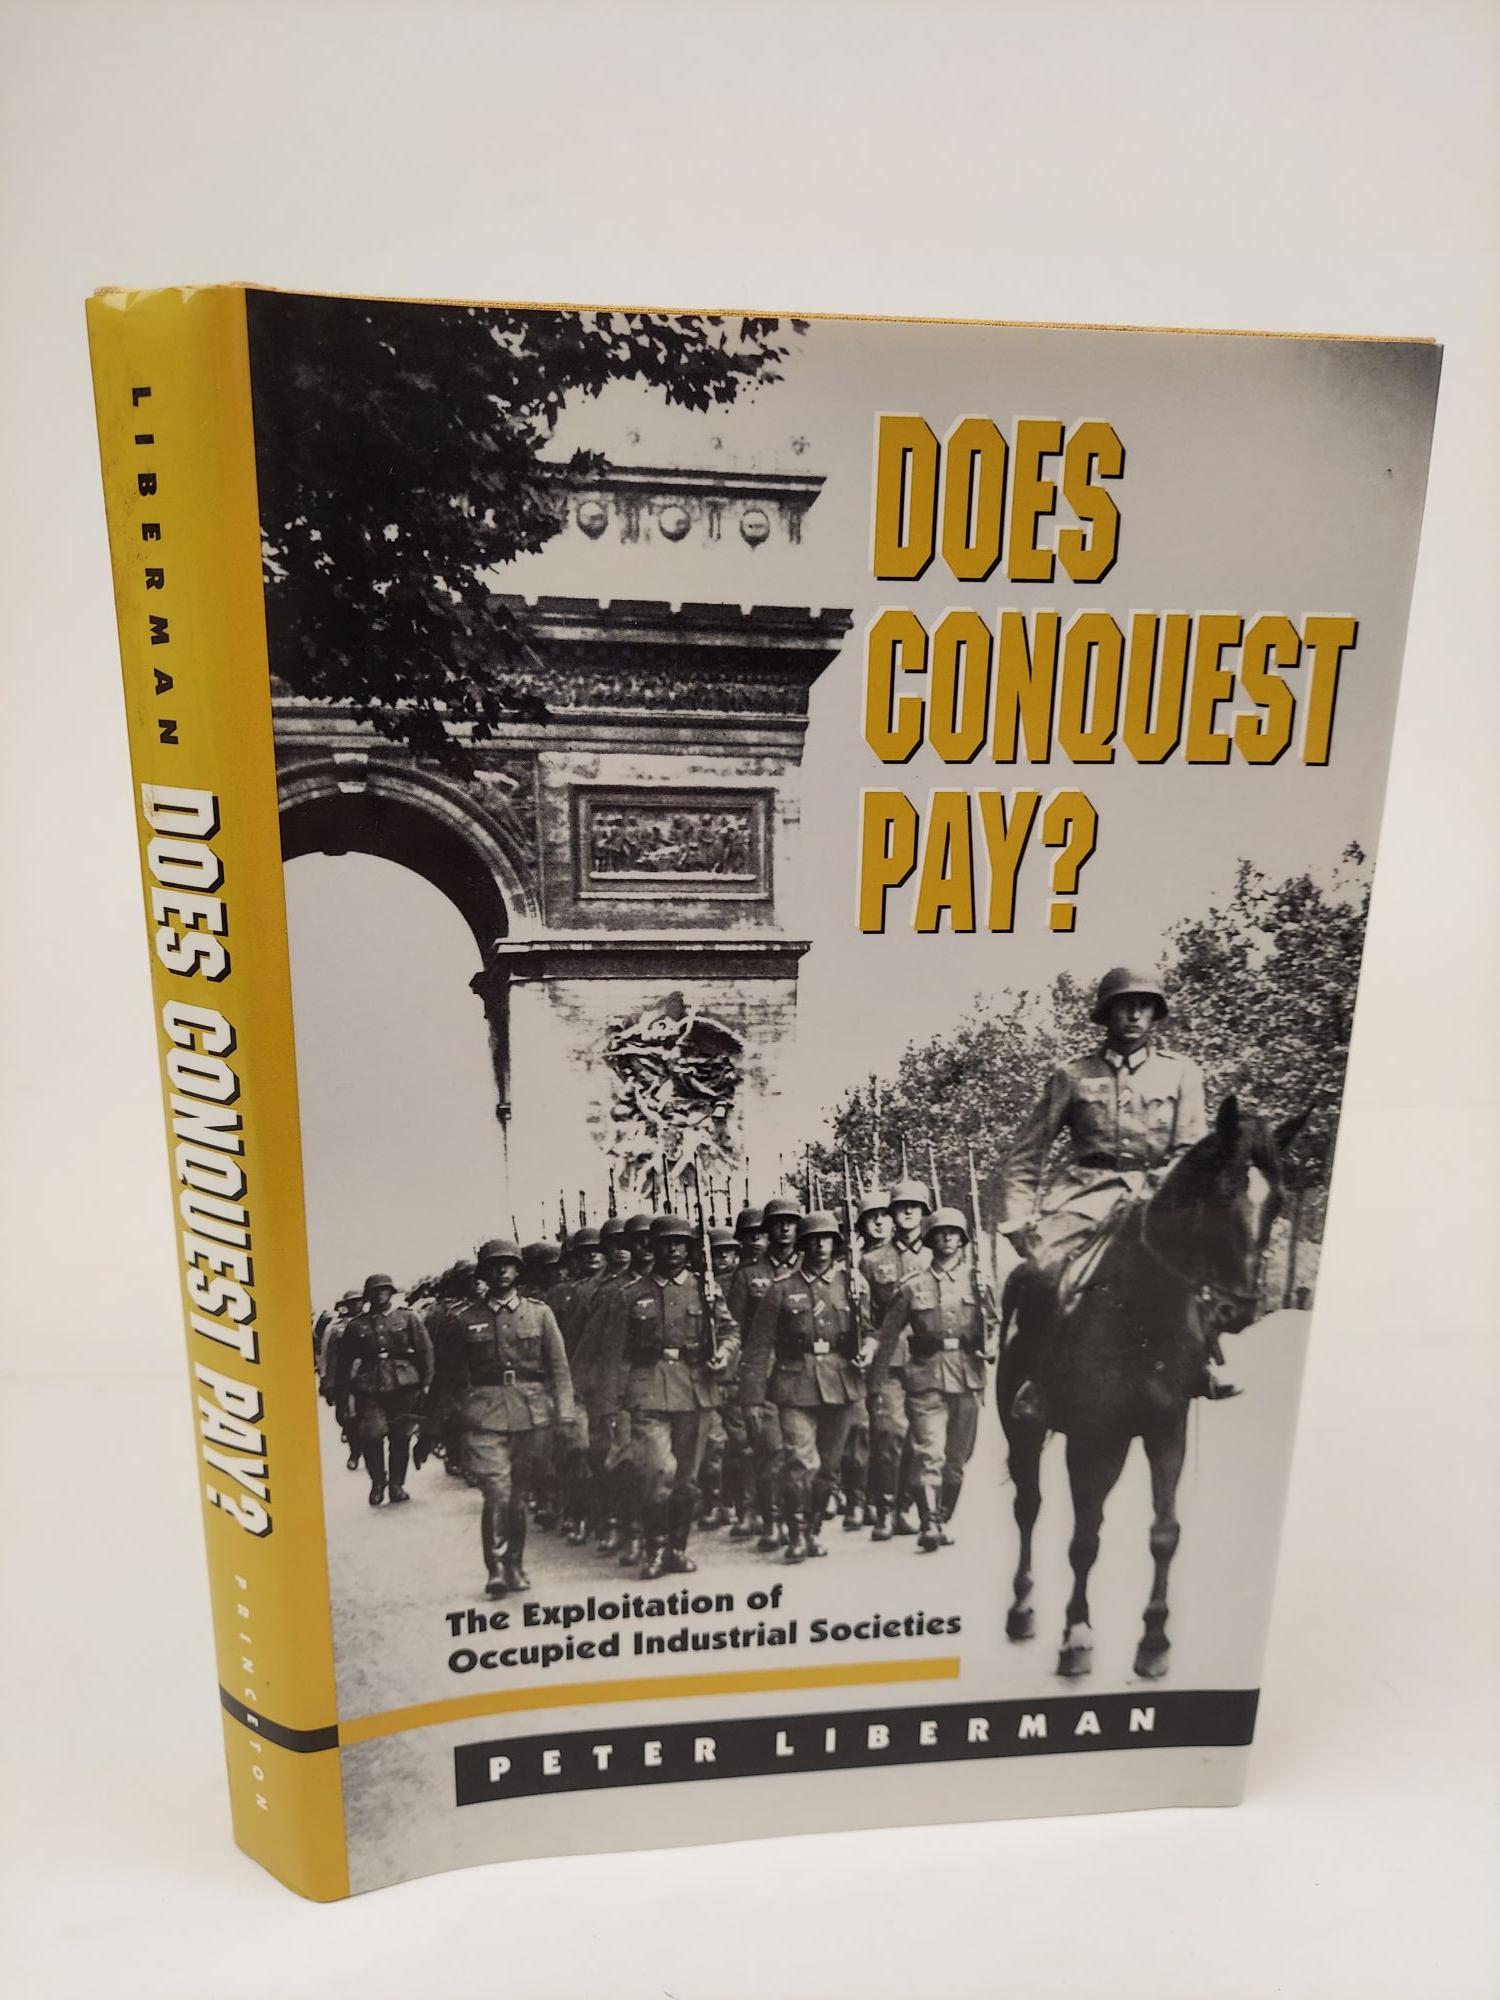 DOES CONQUEST PAY? THE EXPLOITATION OF OCCUPIED INDUSTRIAL SOCIETIES - Liberman, Peter